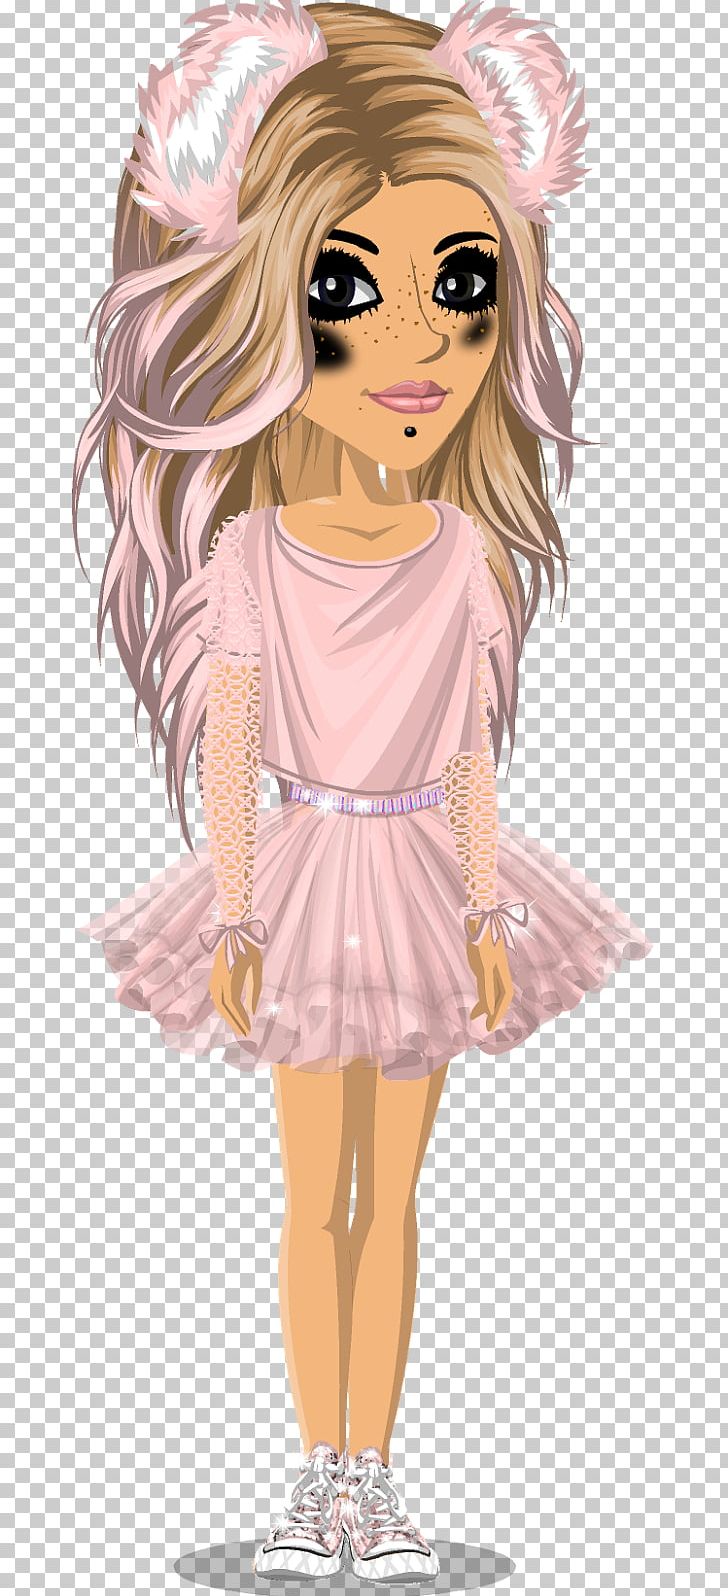 MovieStarPlanet Television Blog PNG, Clipart, Angel, Anime, Art, Barbie, Cartoon Free PNG Download